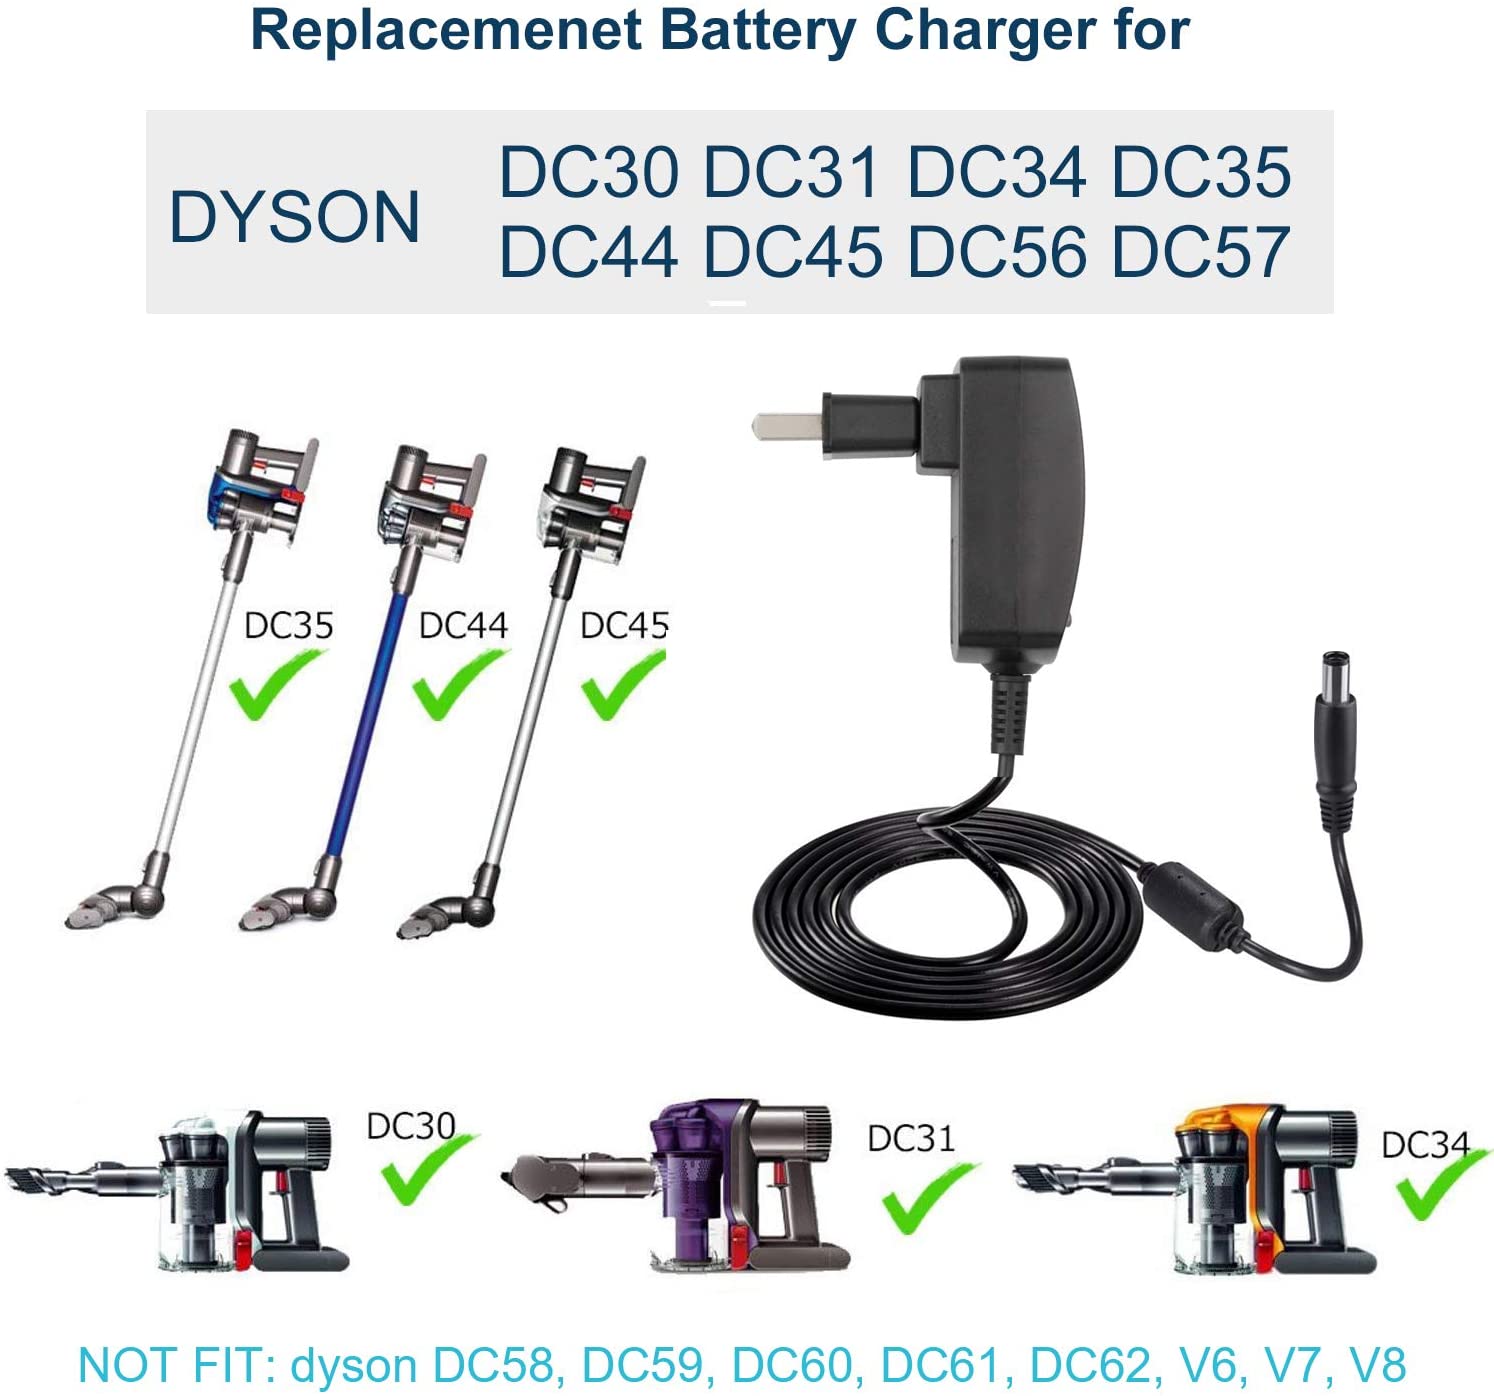 charger for Dyson DC31, DC34 Vacuum Battery